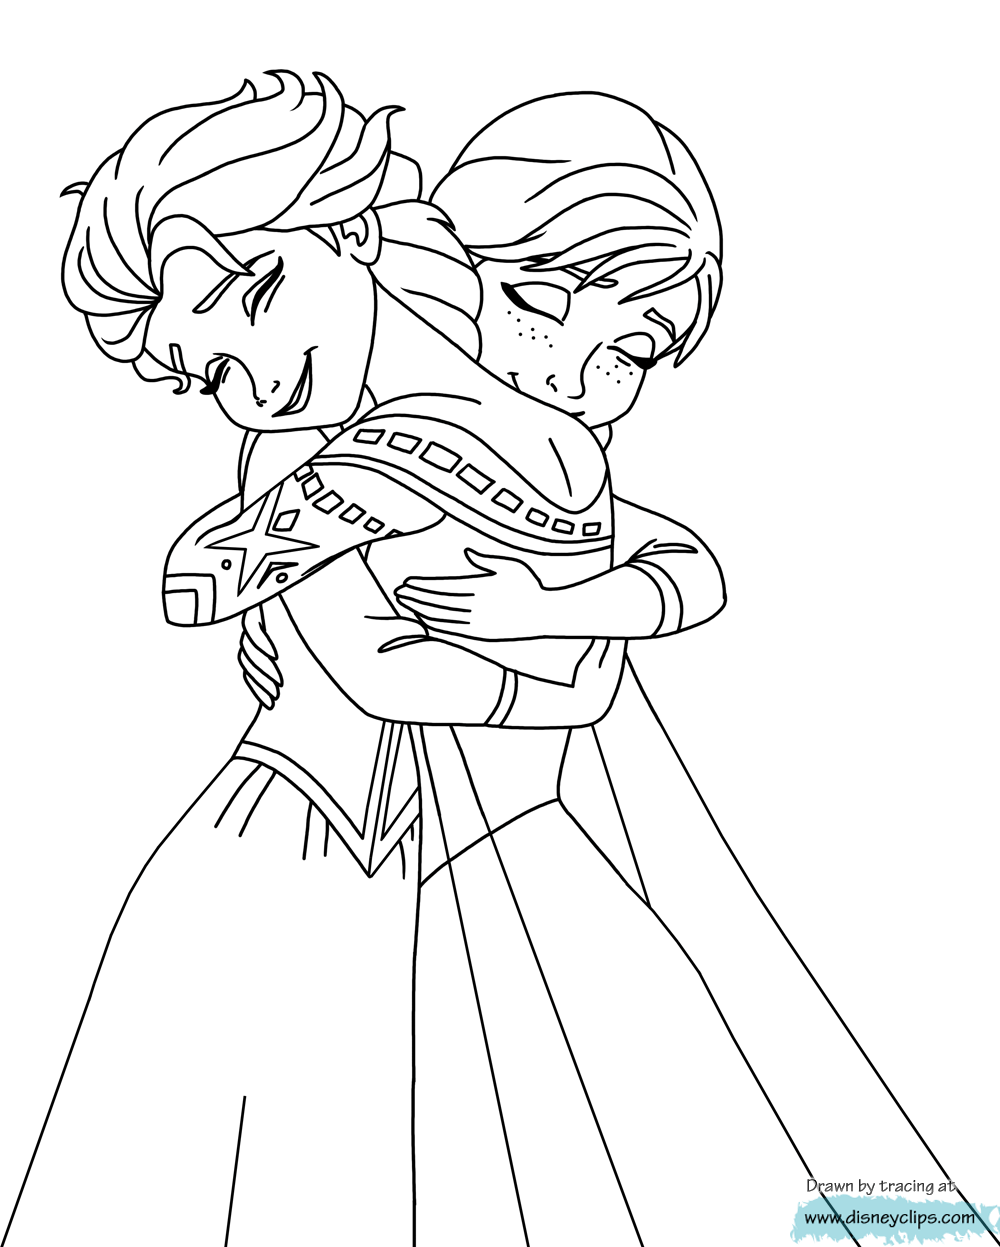 Frozen free to color for children - Frozen Kids Coloring Pages